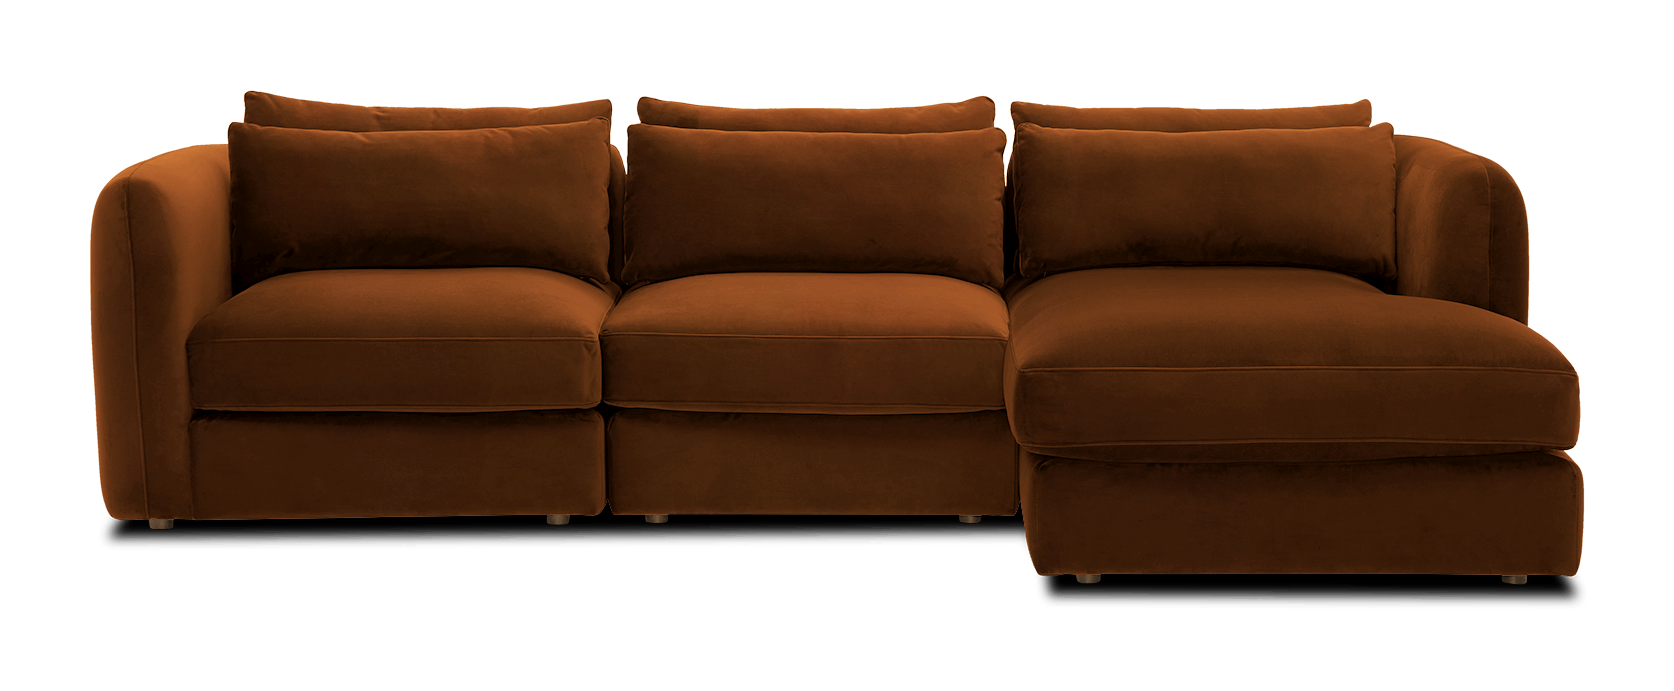 sebastian modular chaise sectional bubbly moscow mule